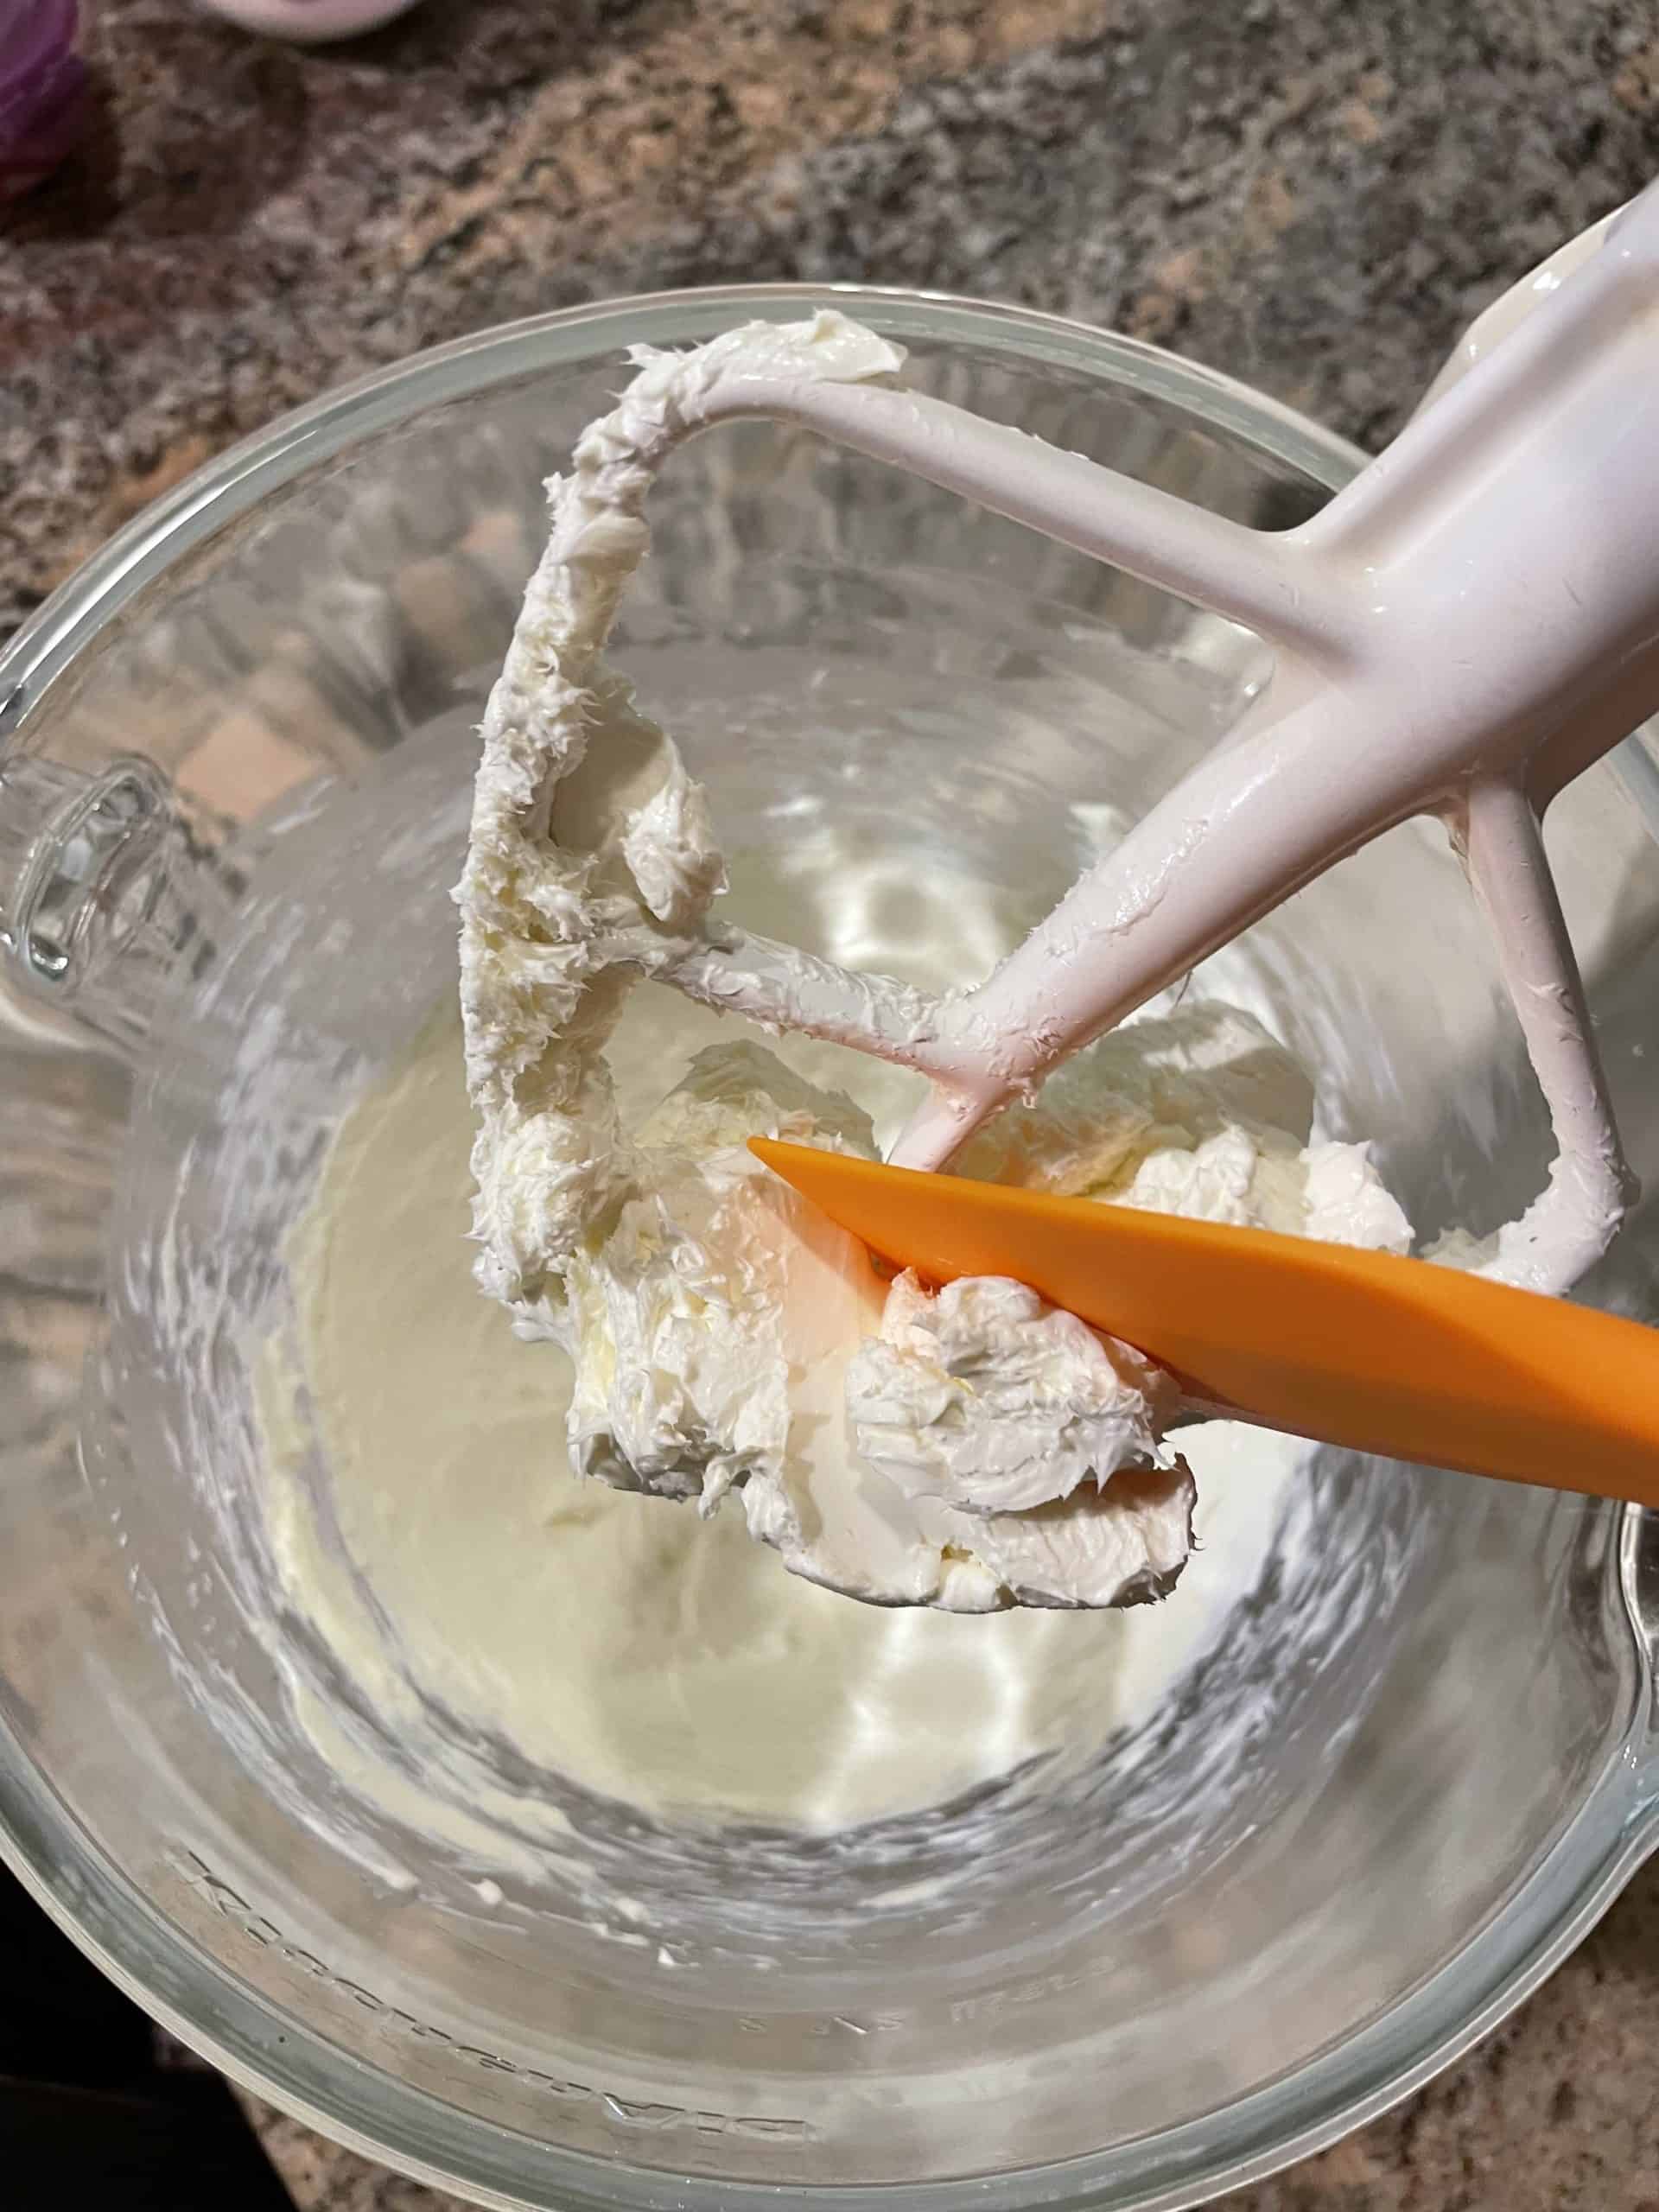 Beating the cream cheese with a stand mixer and flat paddle.